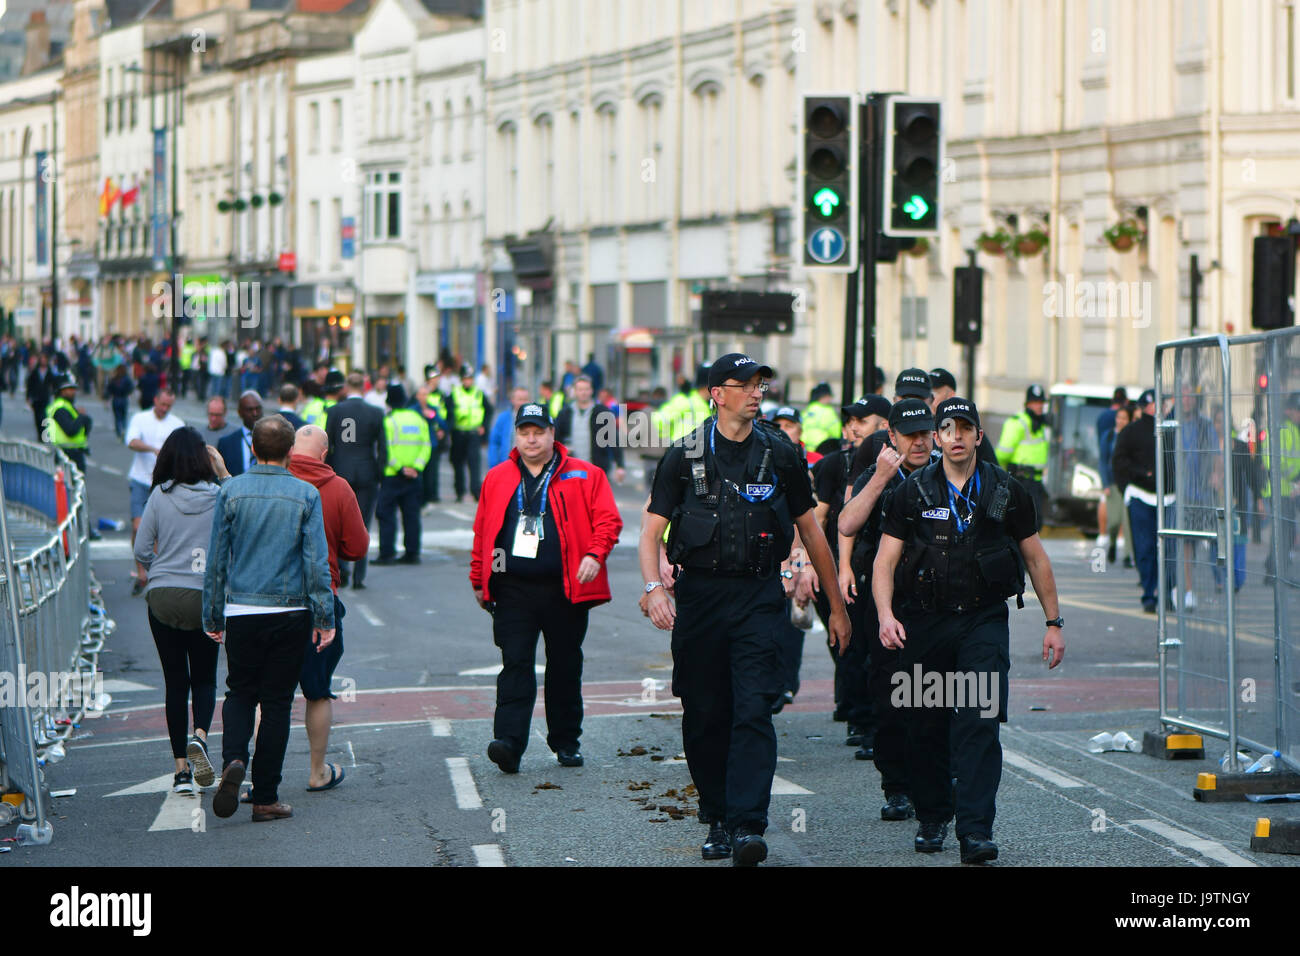 CARDIFF, UK. 3rd June, 2017. Police ensure safety during Champions League Final. British security services on high alert as hundreds of thousands of fans enjoy football in the capital of Wales Credit: Ian Redding/Alamy Live News Stock Photo